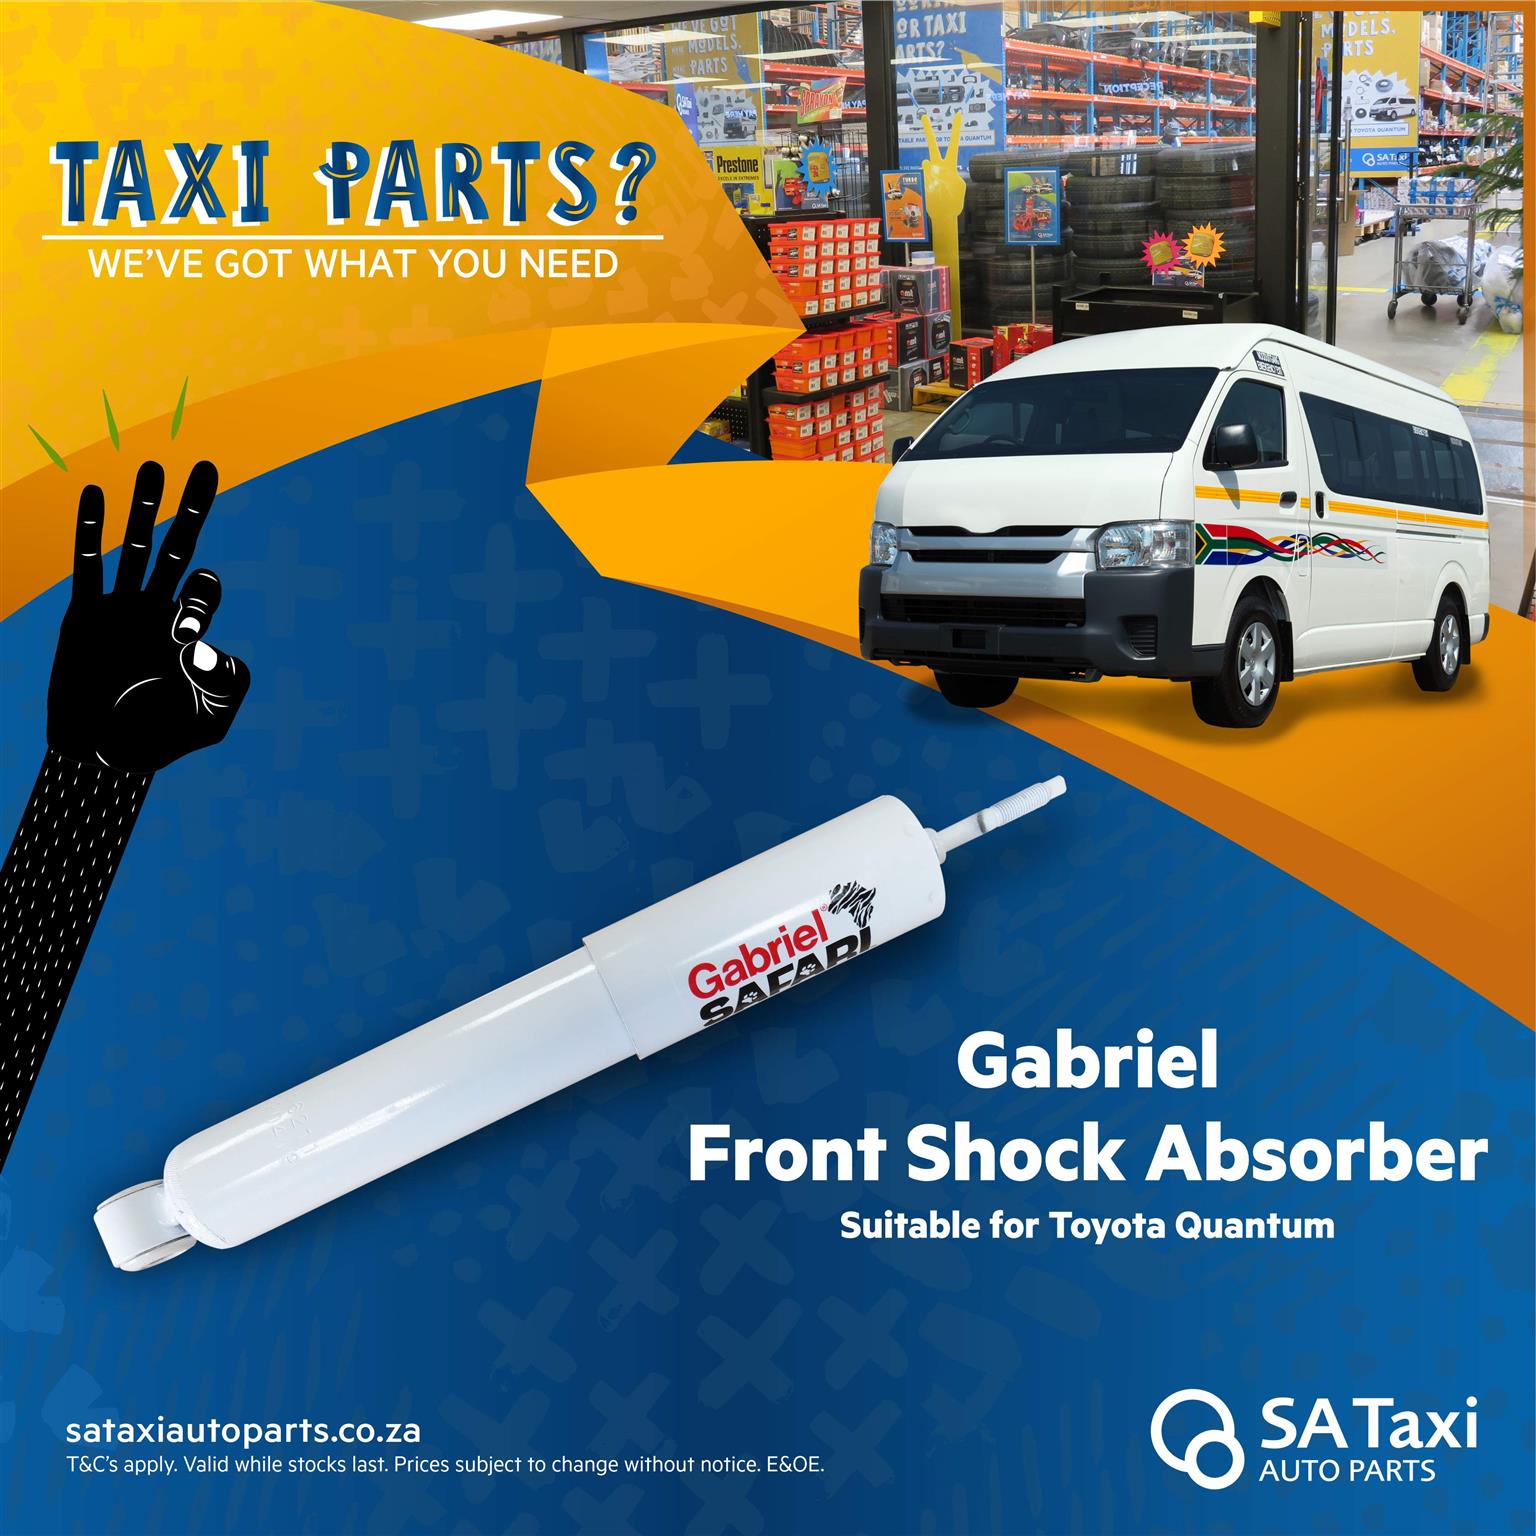 New Gabriel Rear Shock Absorber for Toyota Quantum